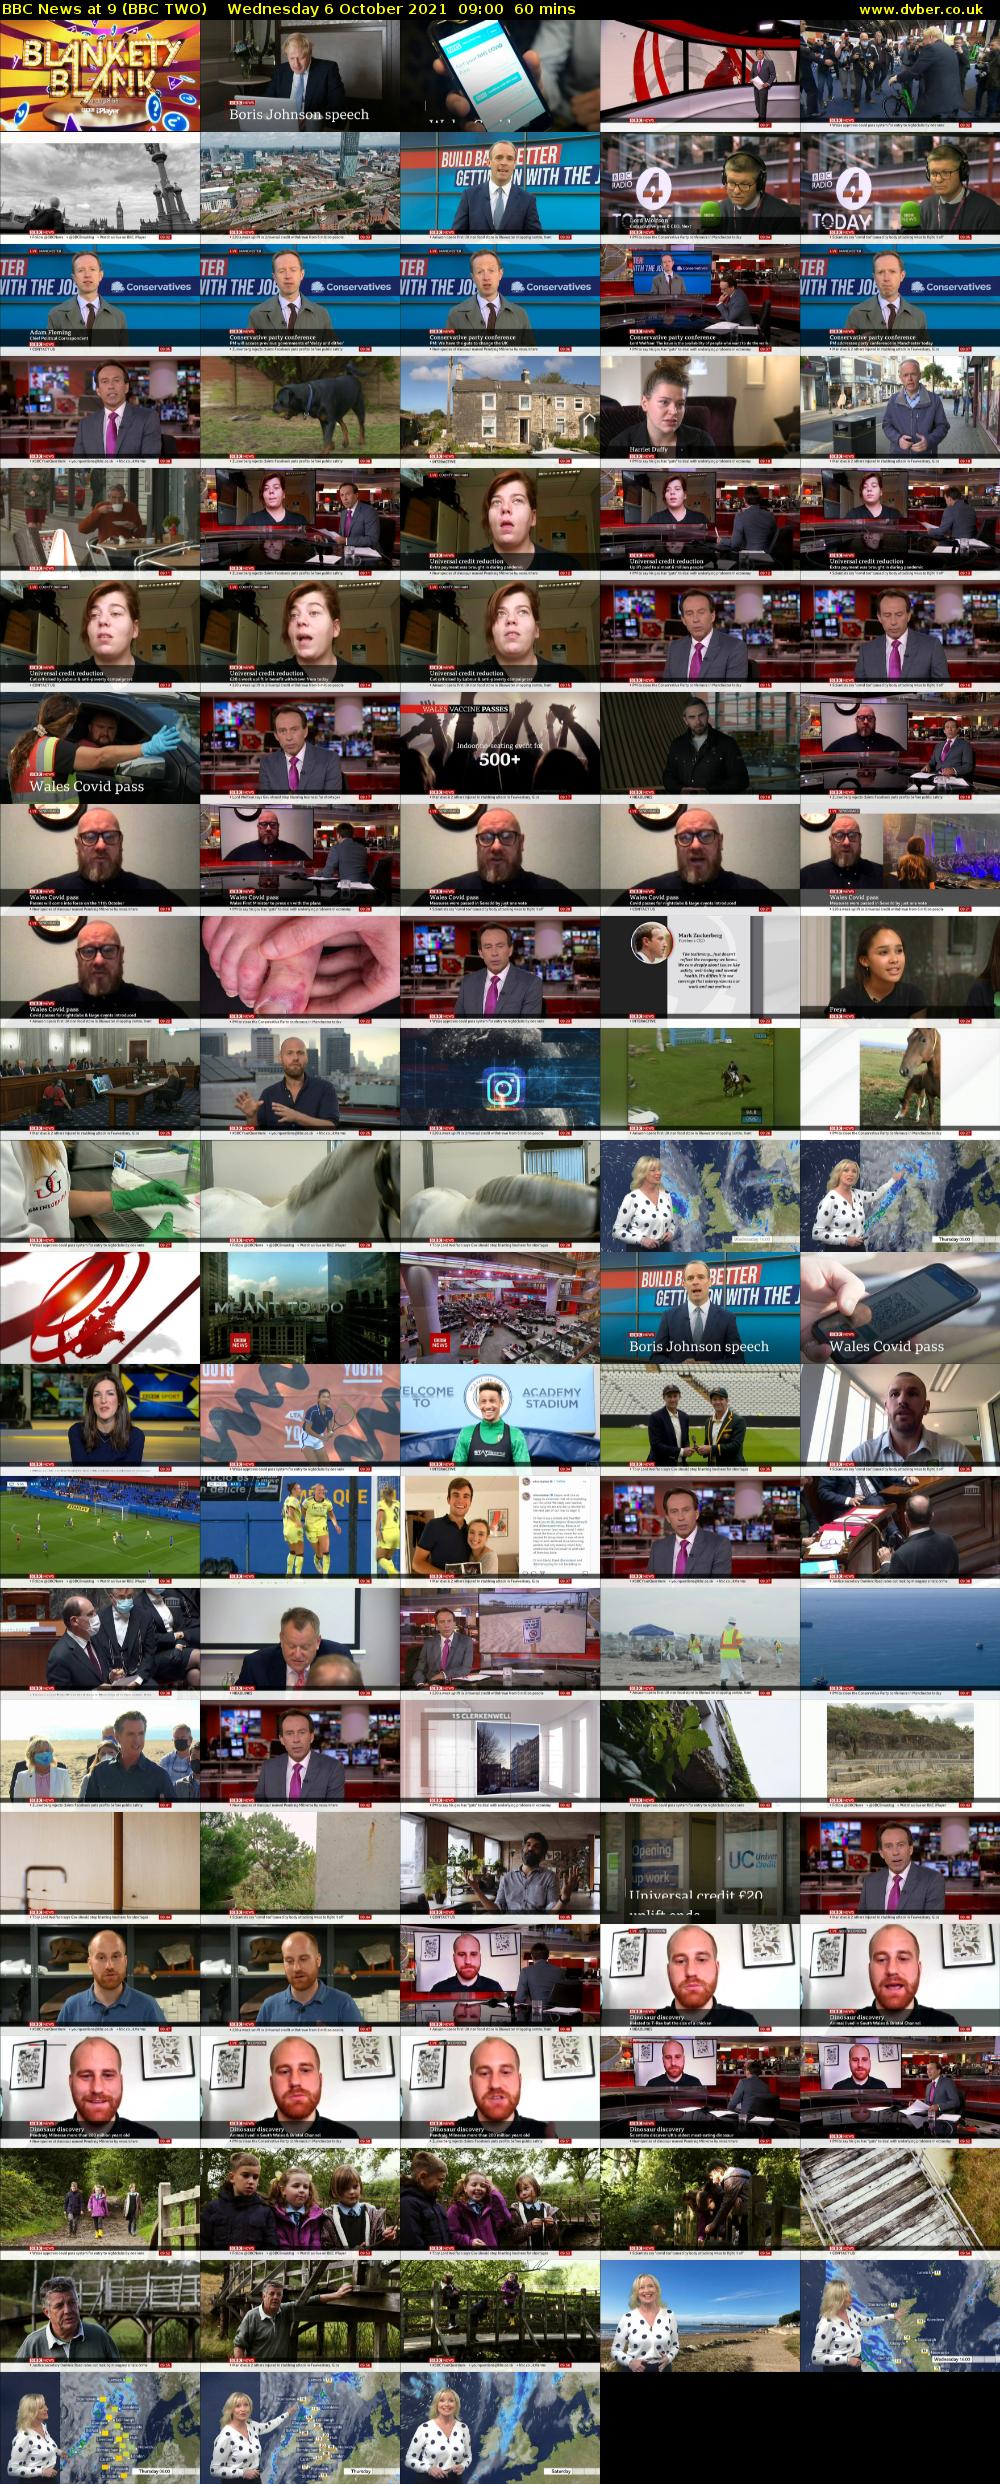 BBC News at 9 (BBC TWO) Wednesday 6 October 2021 09:00 - 10:00